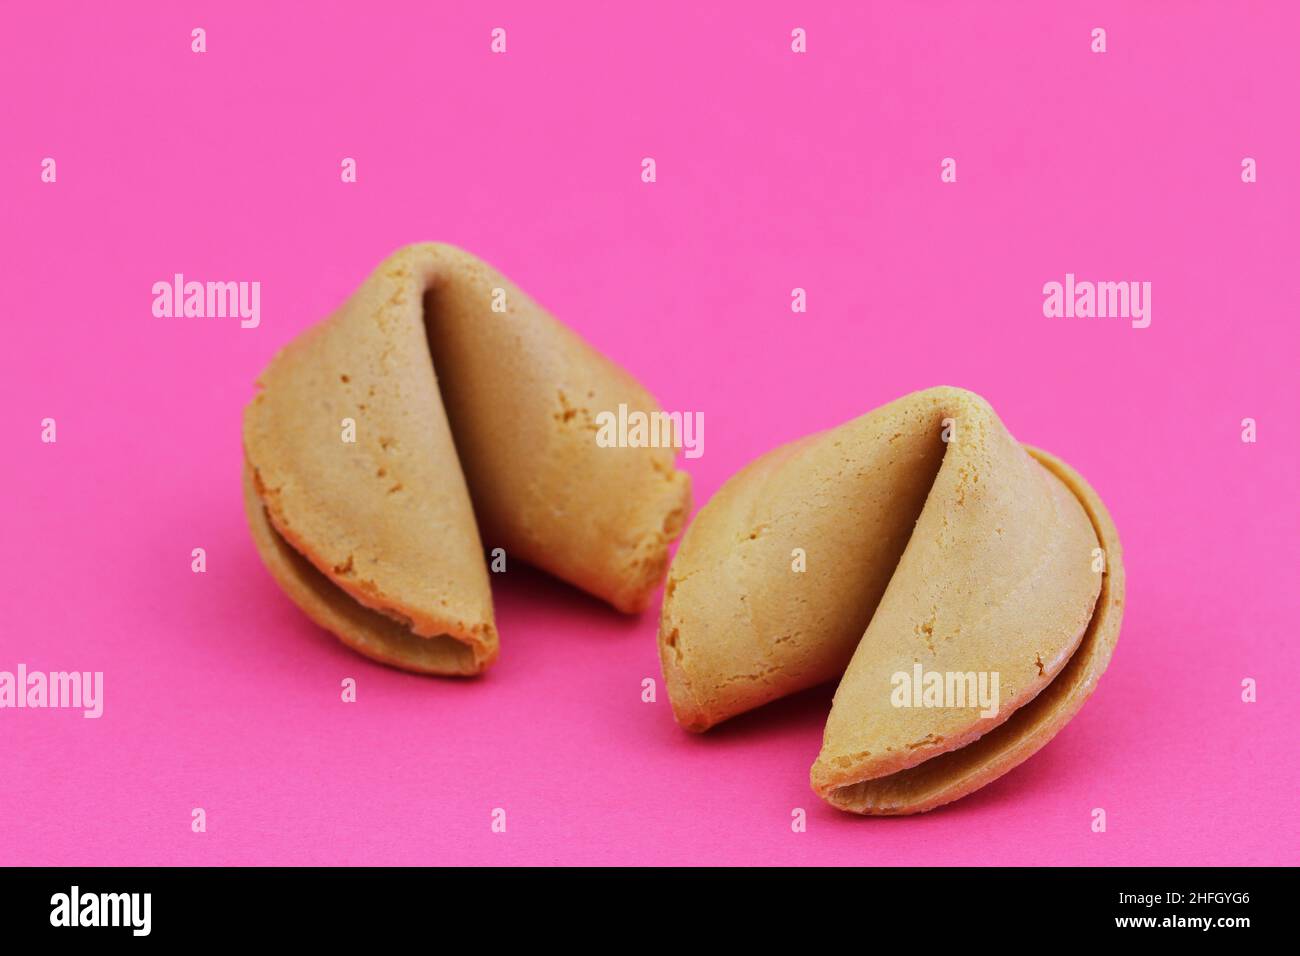 Two Chinese fortune cookies on vivid pink surface with copy space Stock Photo